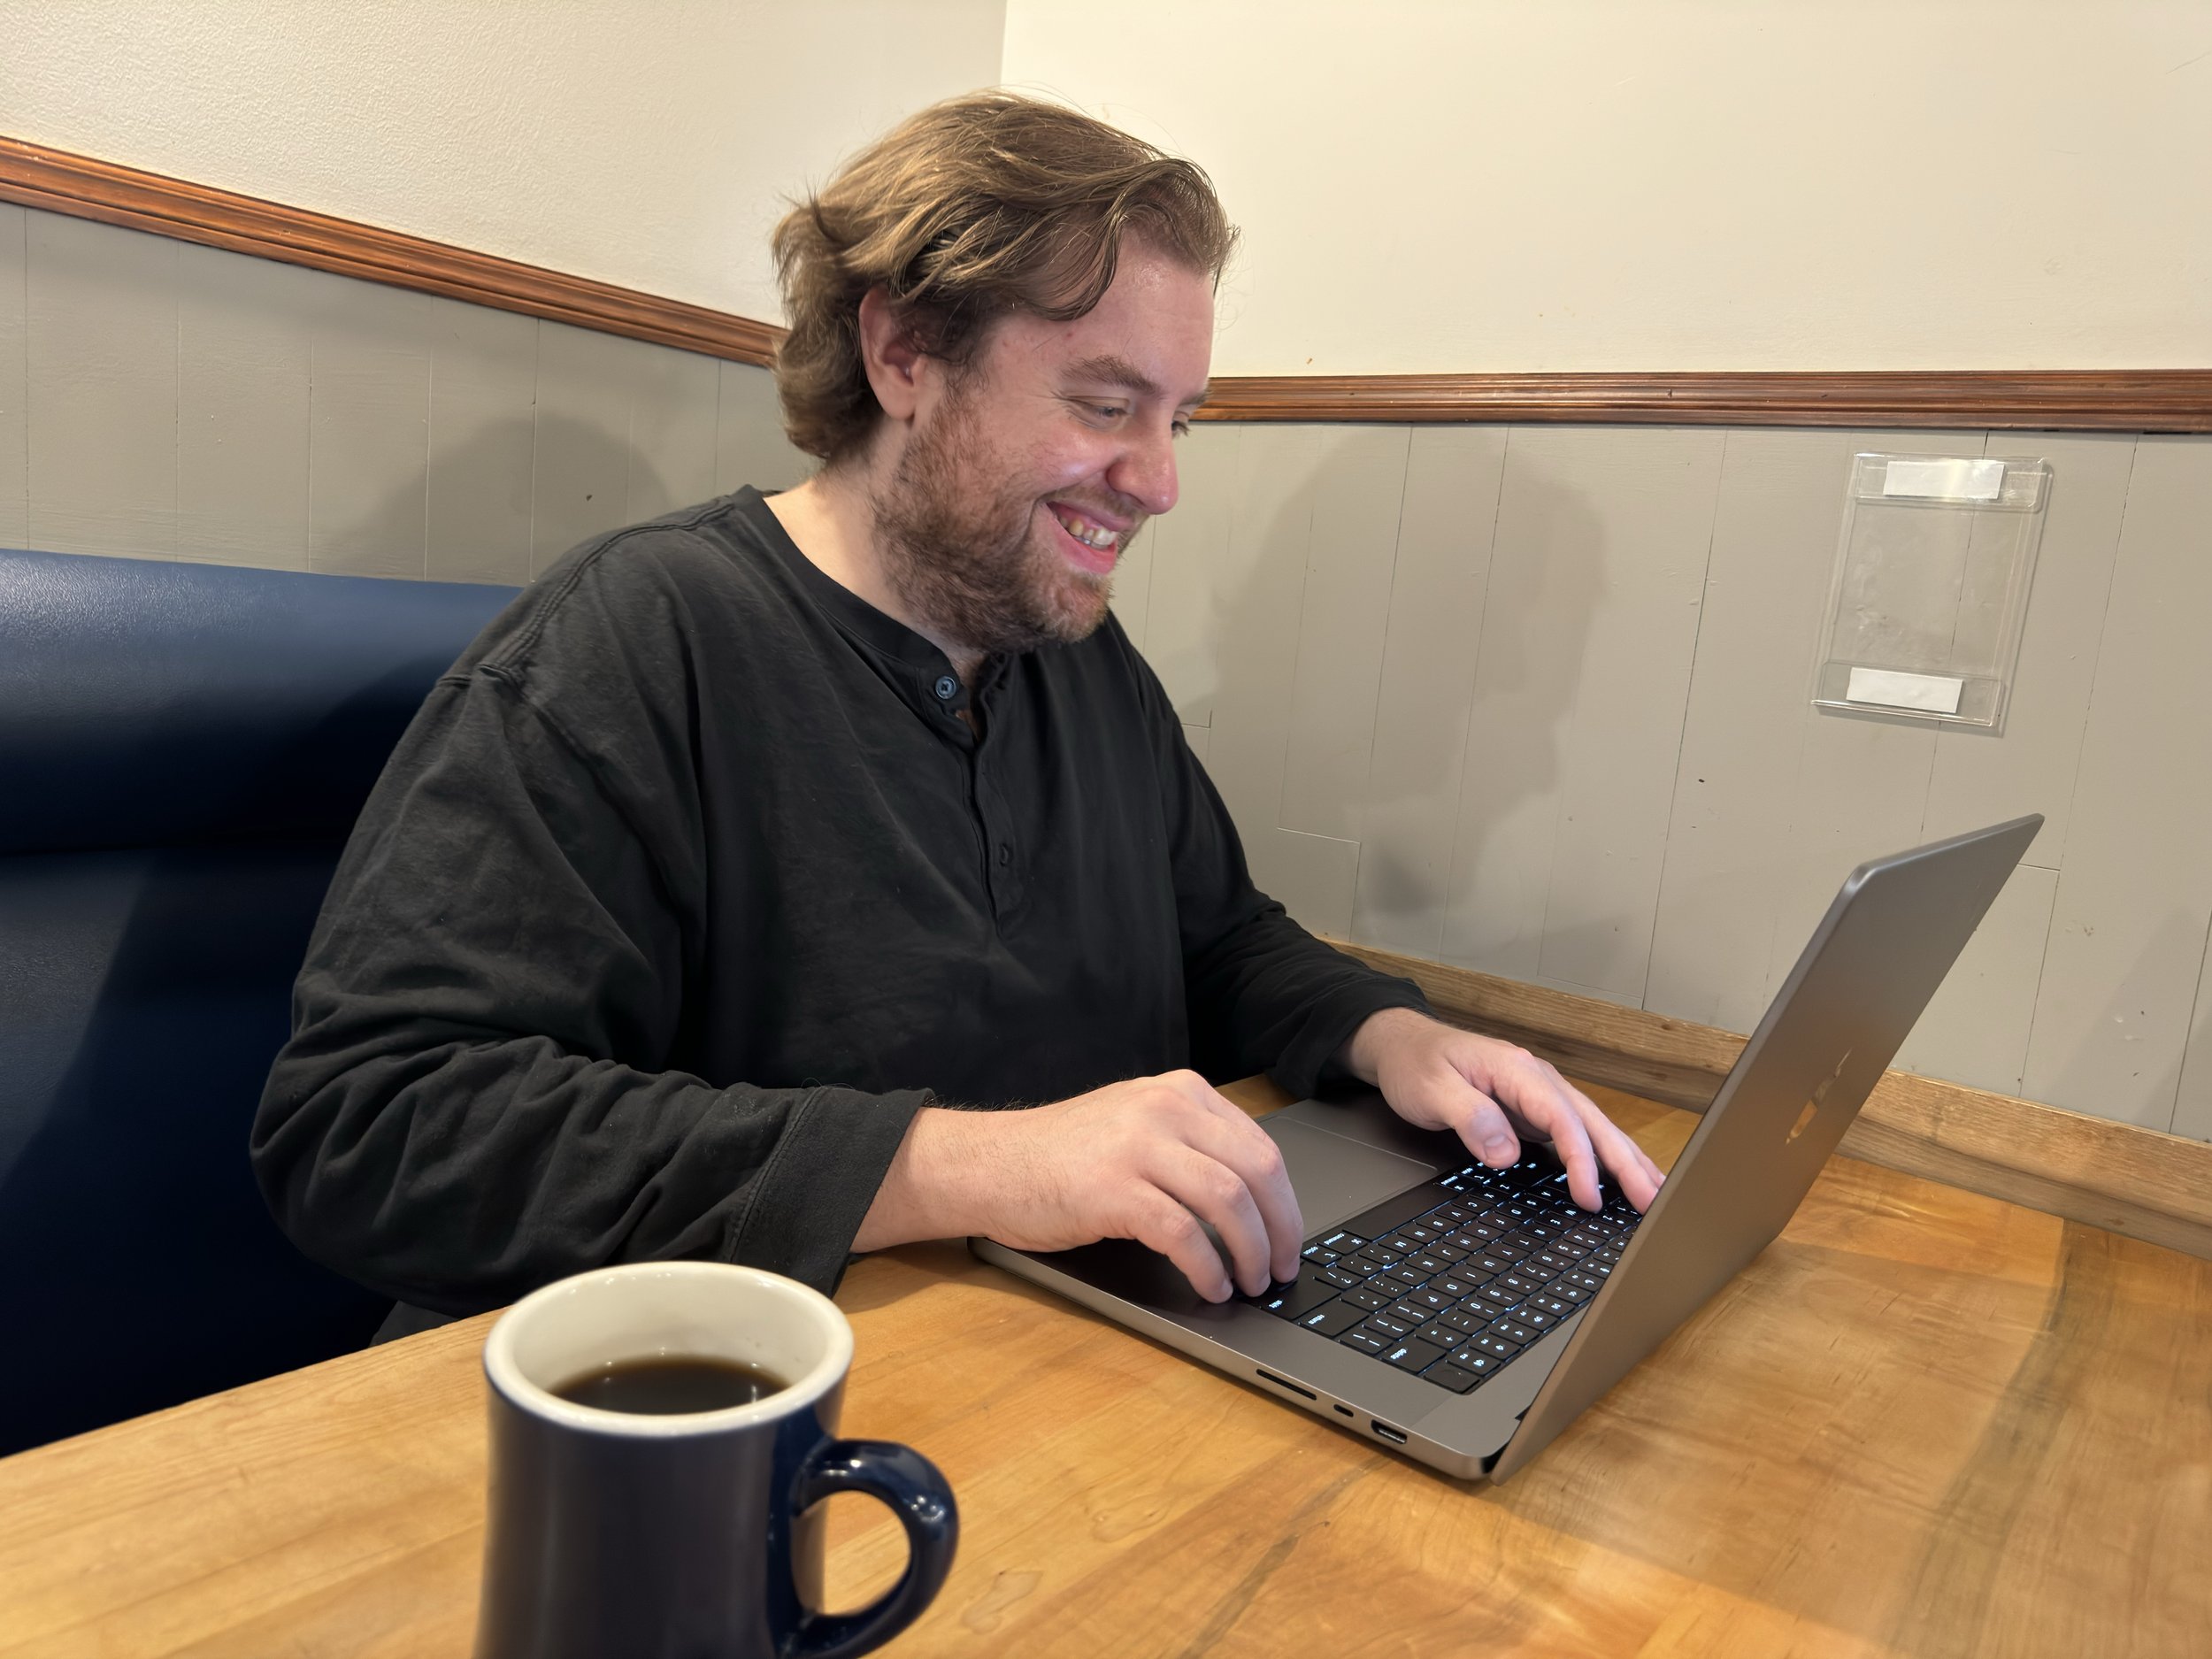  Alex sitting at a table smiling at a MacBook Pro.  A mug of coffee sits in the foreground on the table. 